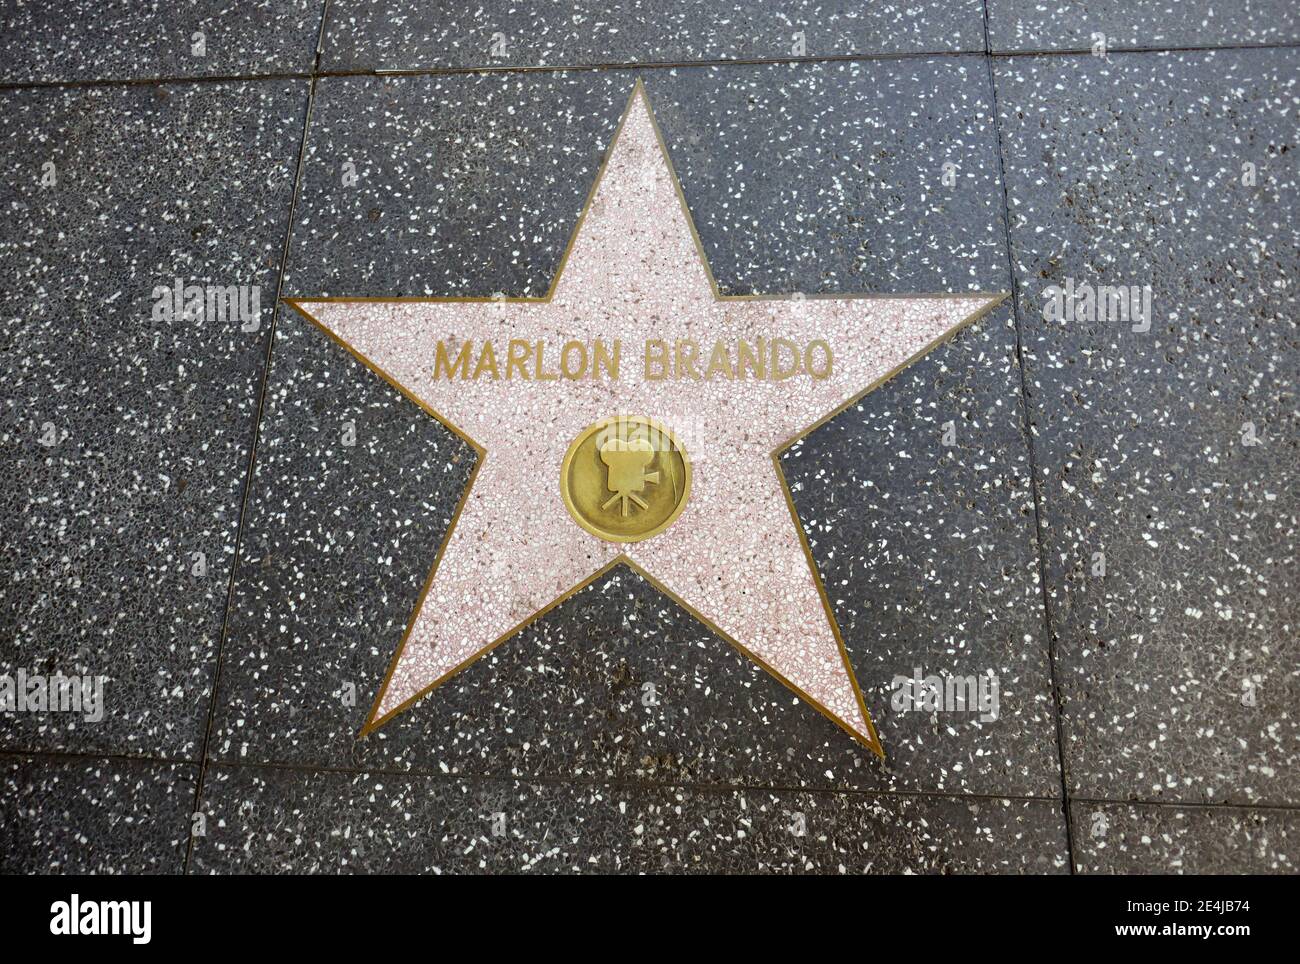 Los Angeles, California, USA 18th January 2021 A general view of atmosphere of actor Marlon Brando Star on Walk of Fame during Coronavirus Covid-19 Pandemic on January 18, 2021 in Los Angeles, California, USA. Photo by Barry King/Alamy Stock Photo Stock Photo